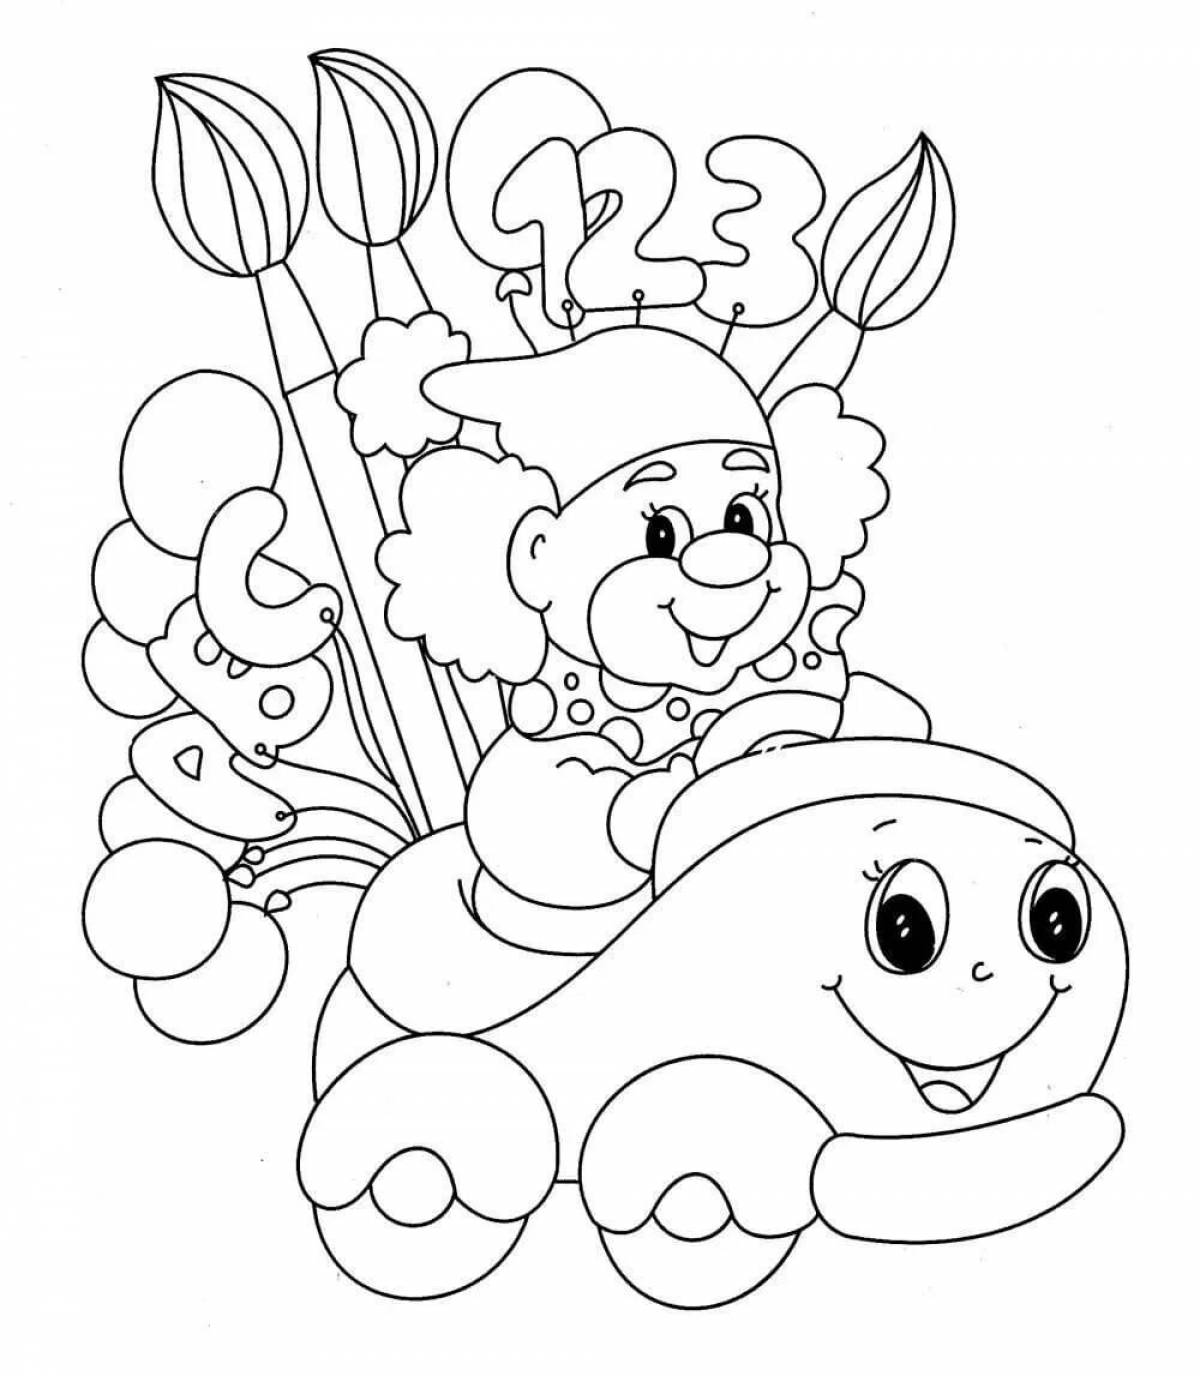 Bright colored coloring pages for kids